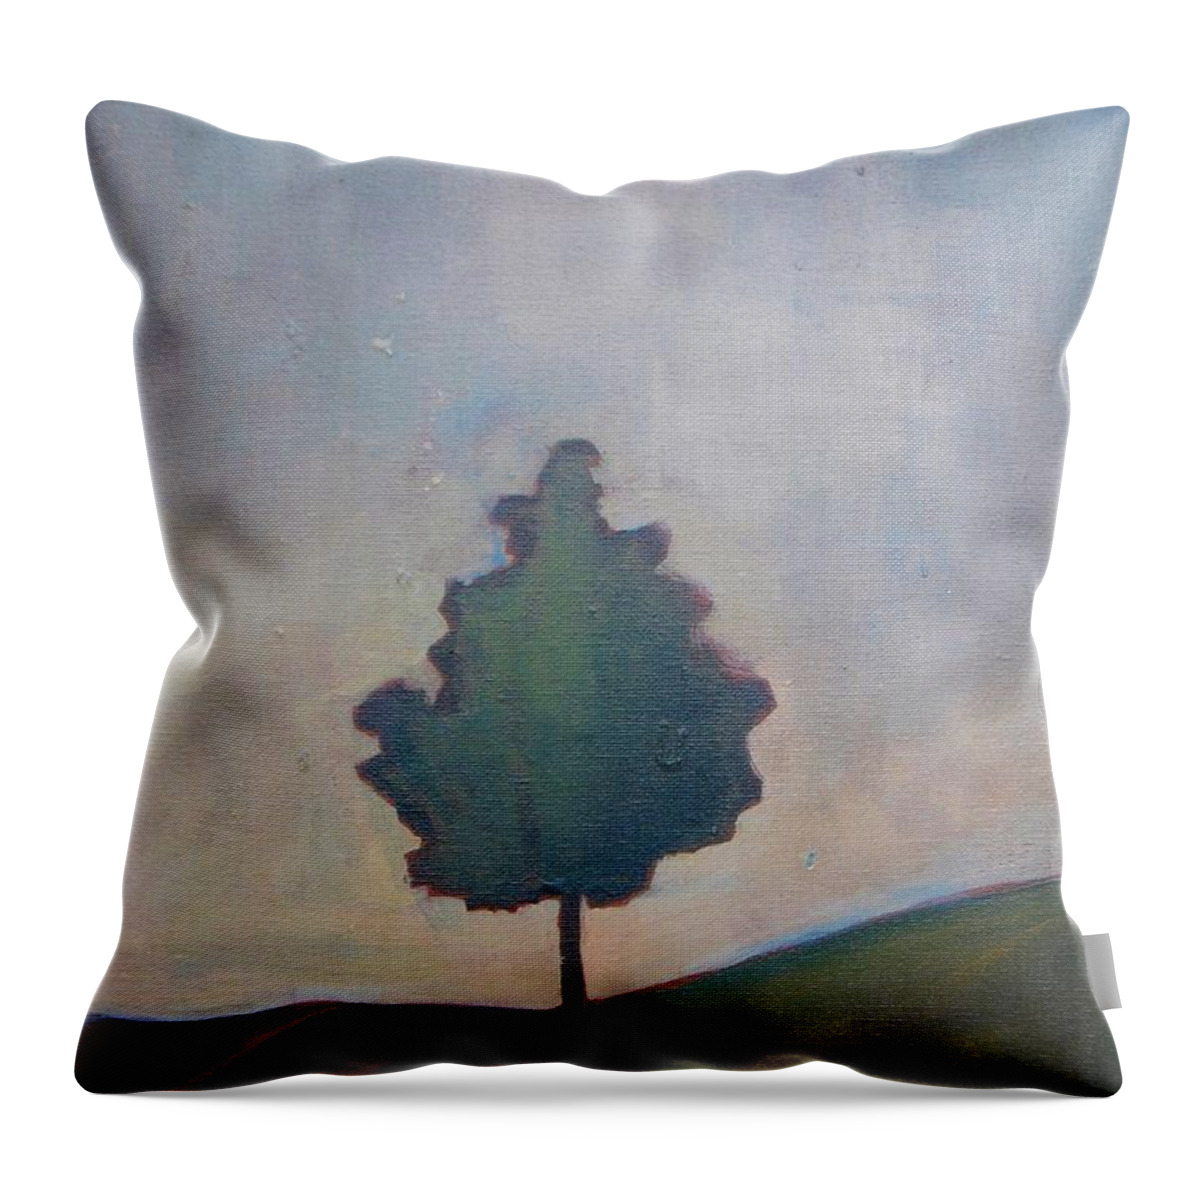 Tree Throw Pillow featuring the painting Bordering Tree by Vesna Antic